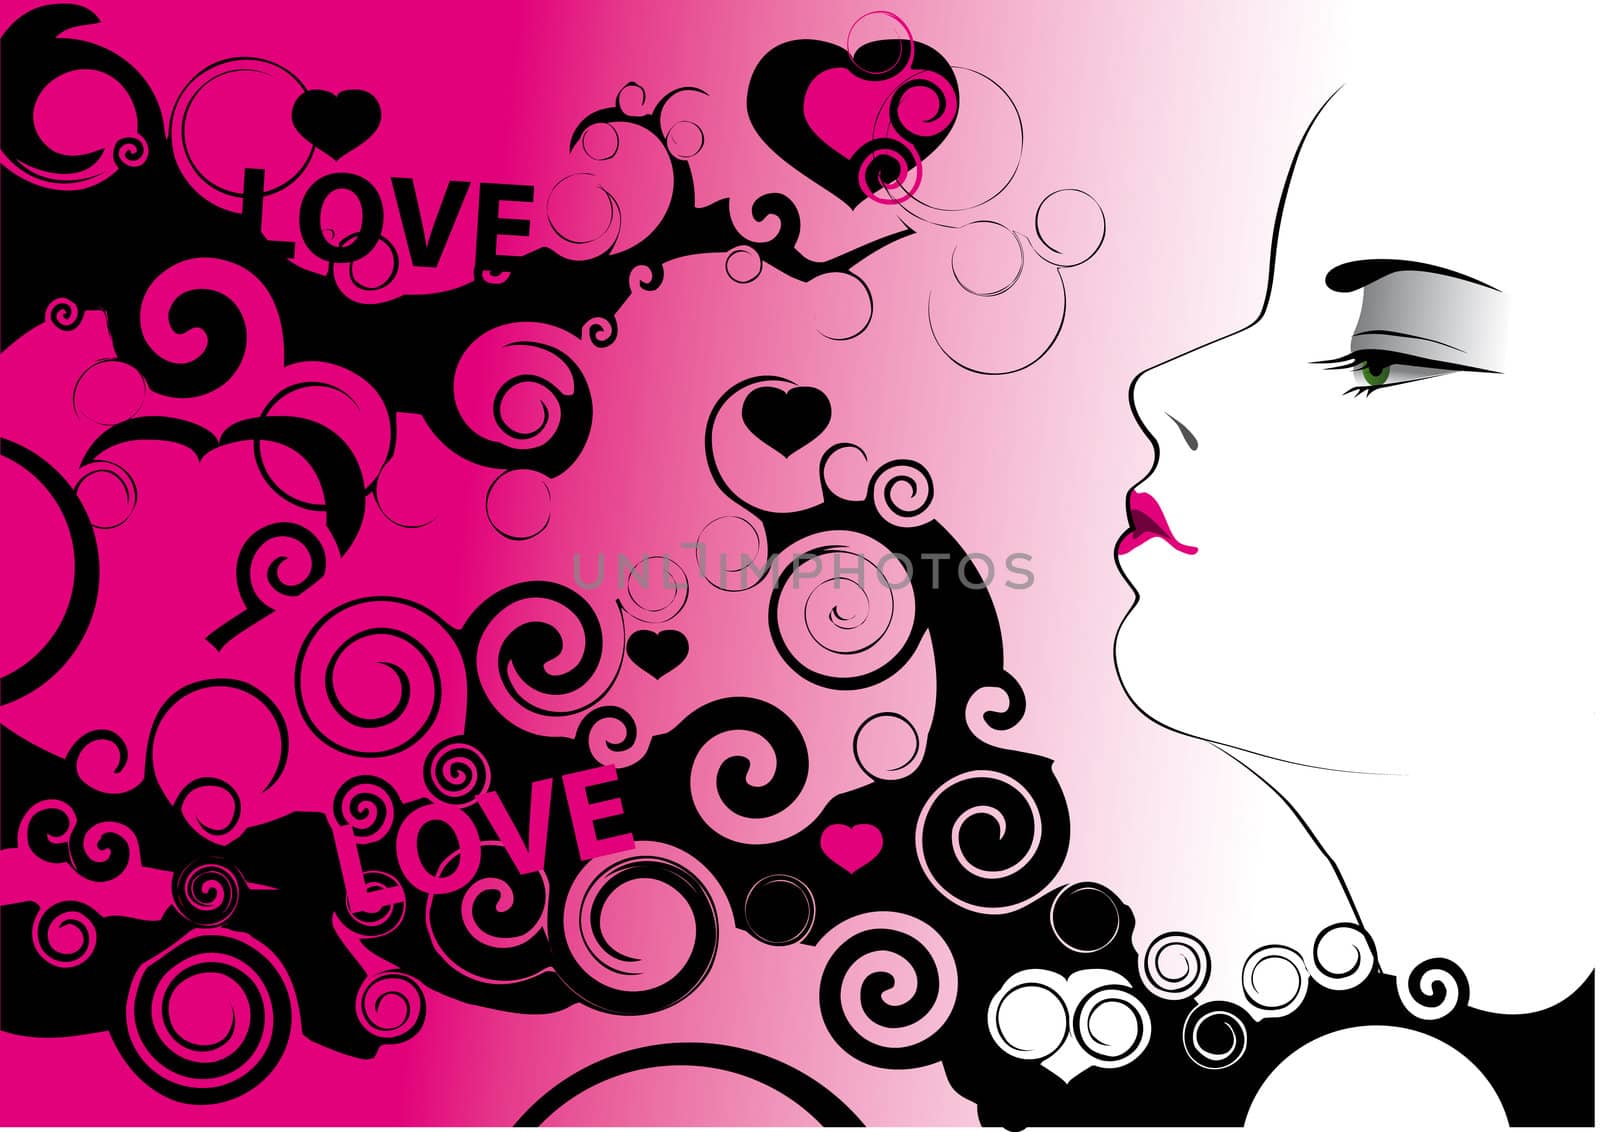 Girl's face on abstract background with hearts